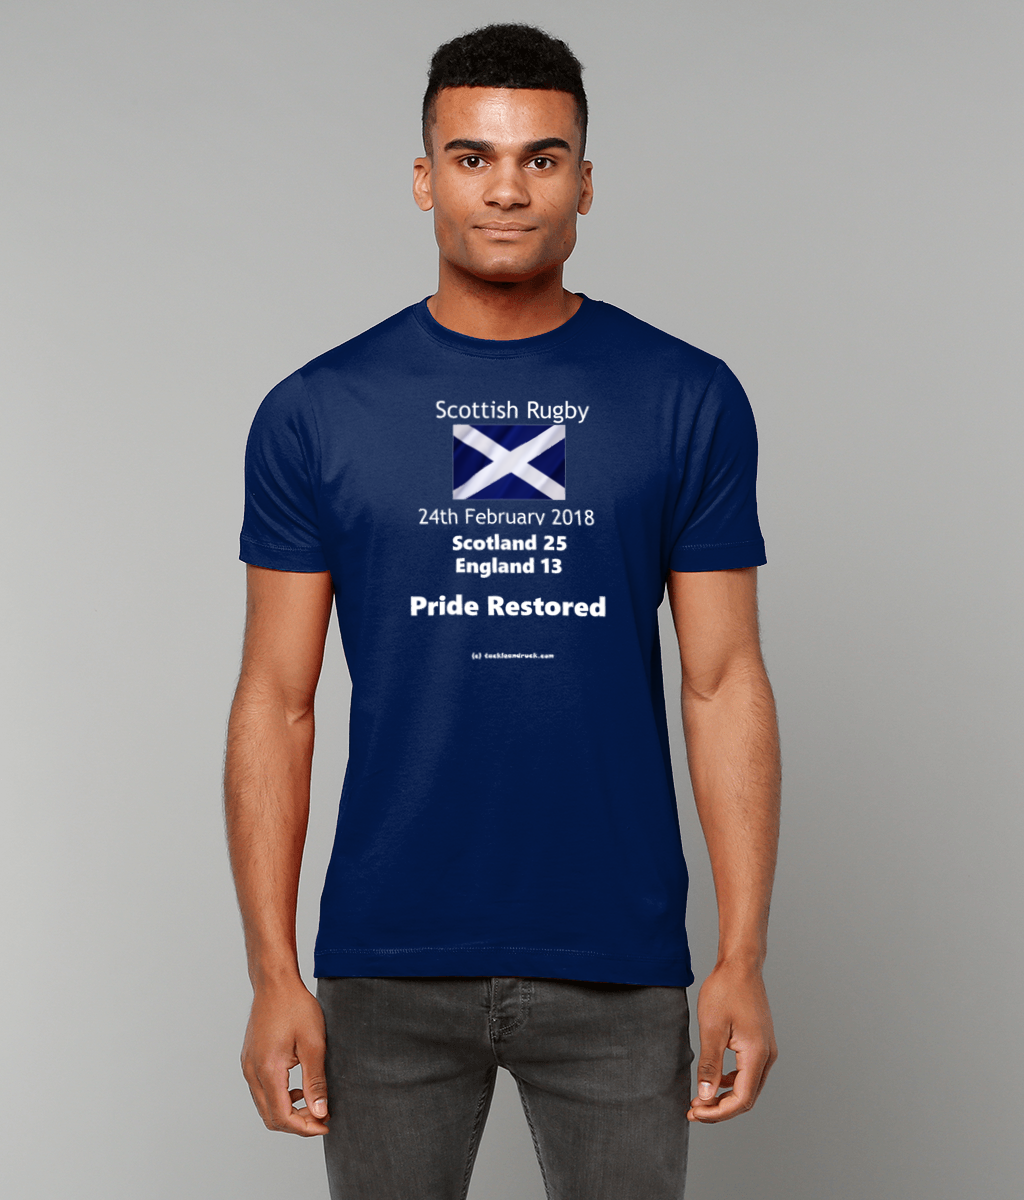 Men's T-Shirt - Scottish Rugby 24th February 2018 Pride Restored